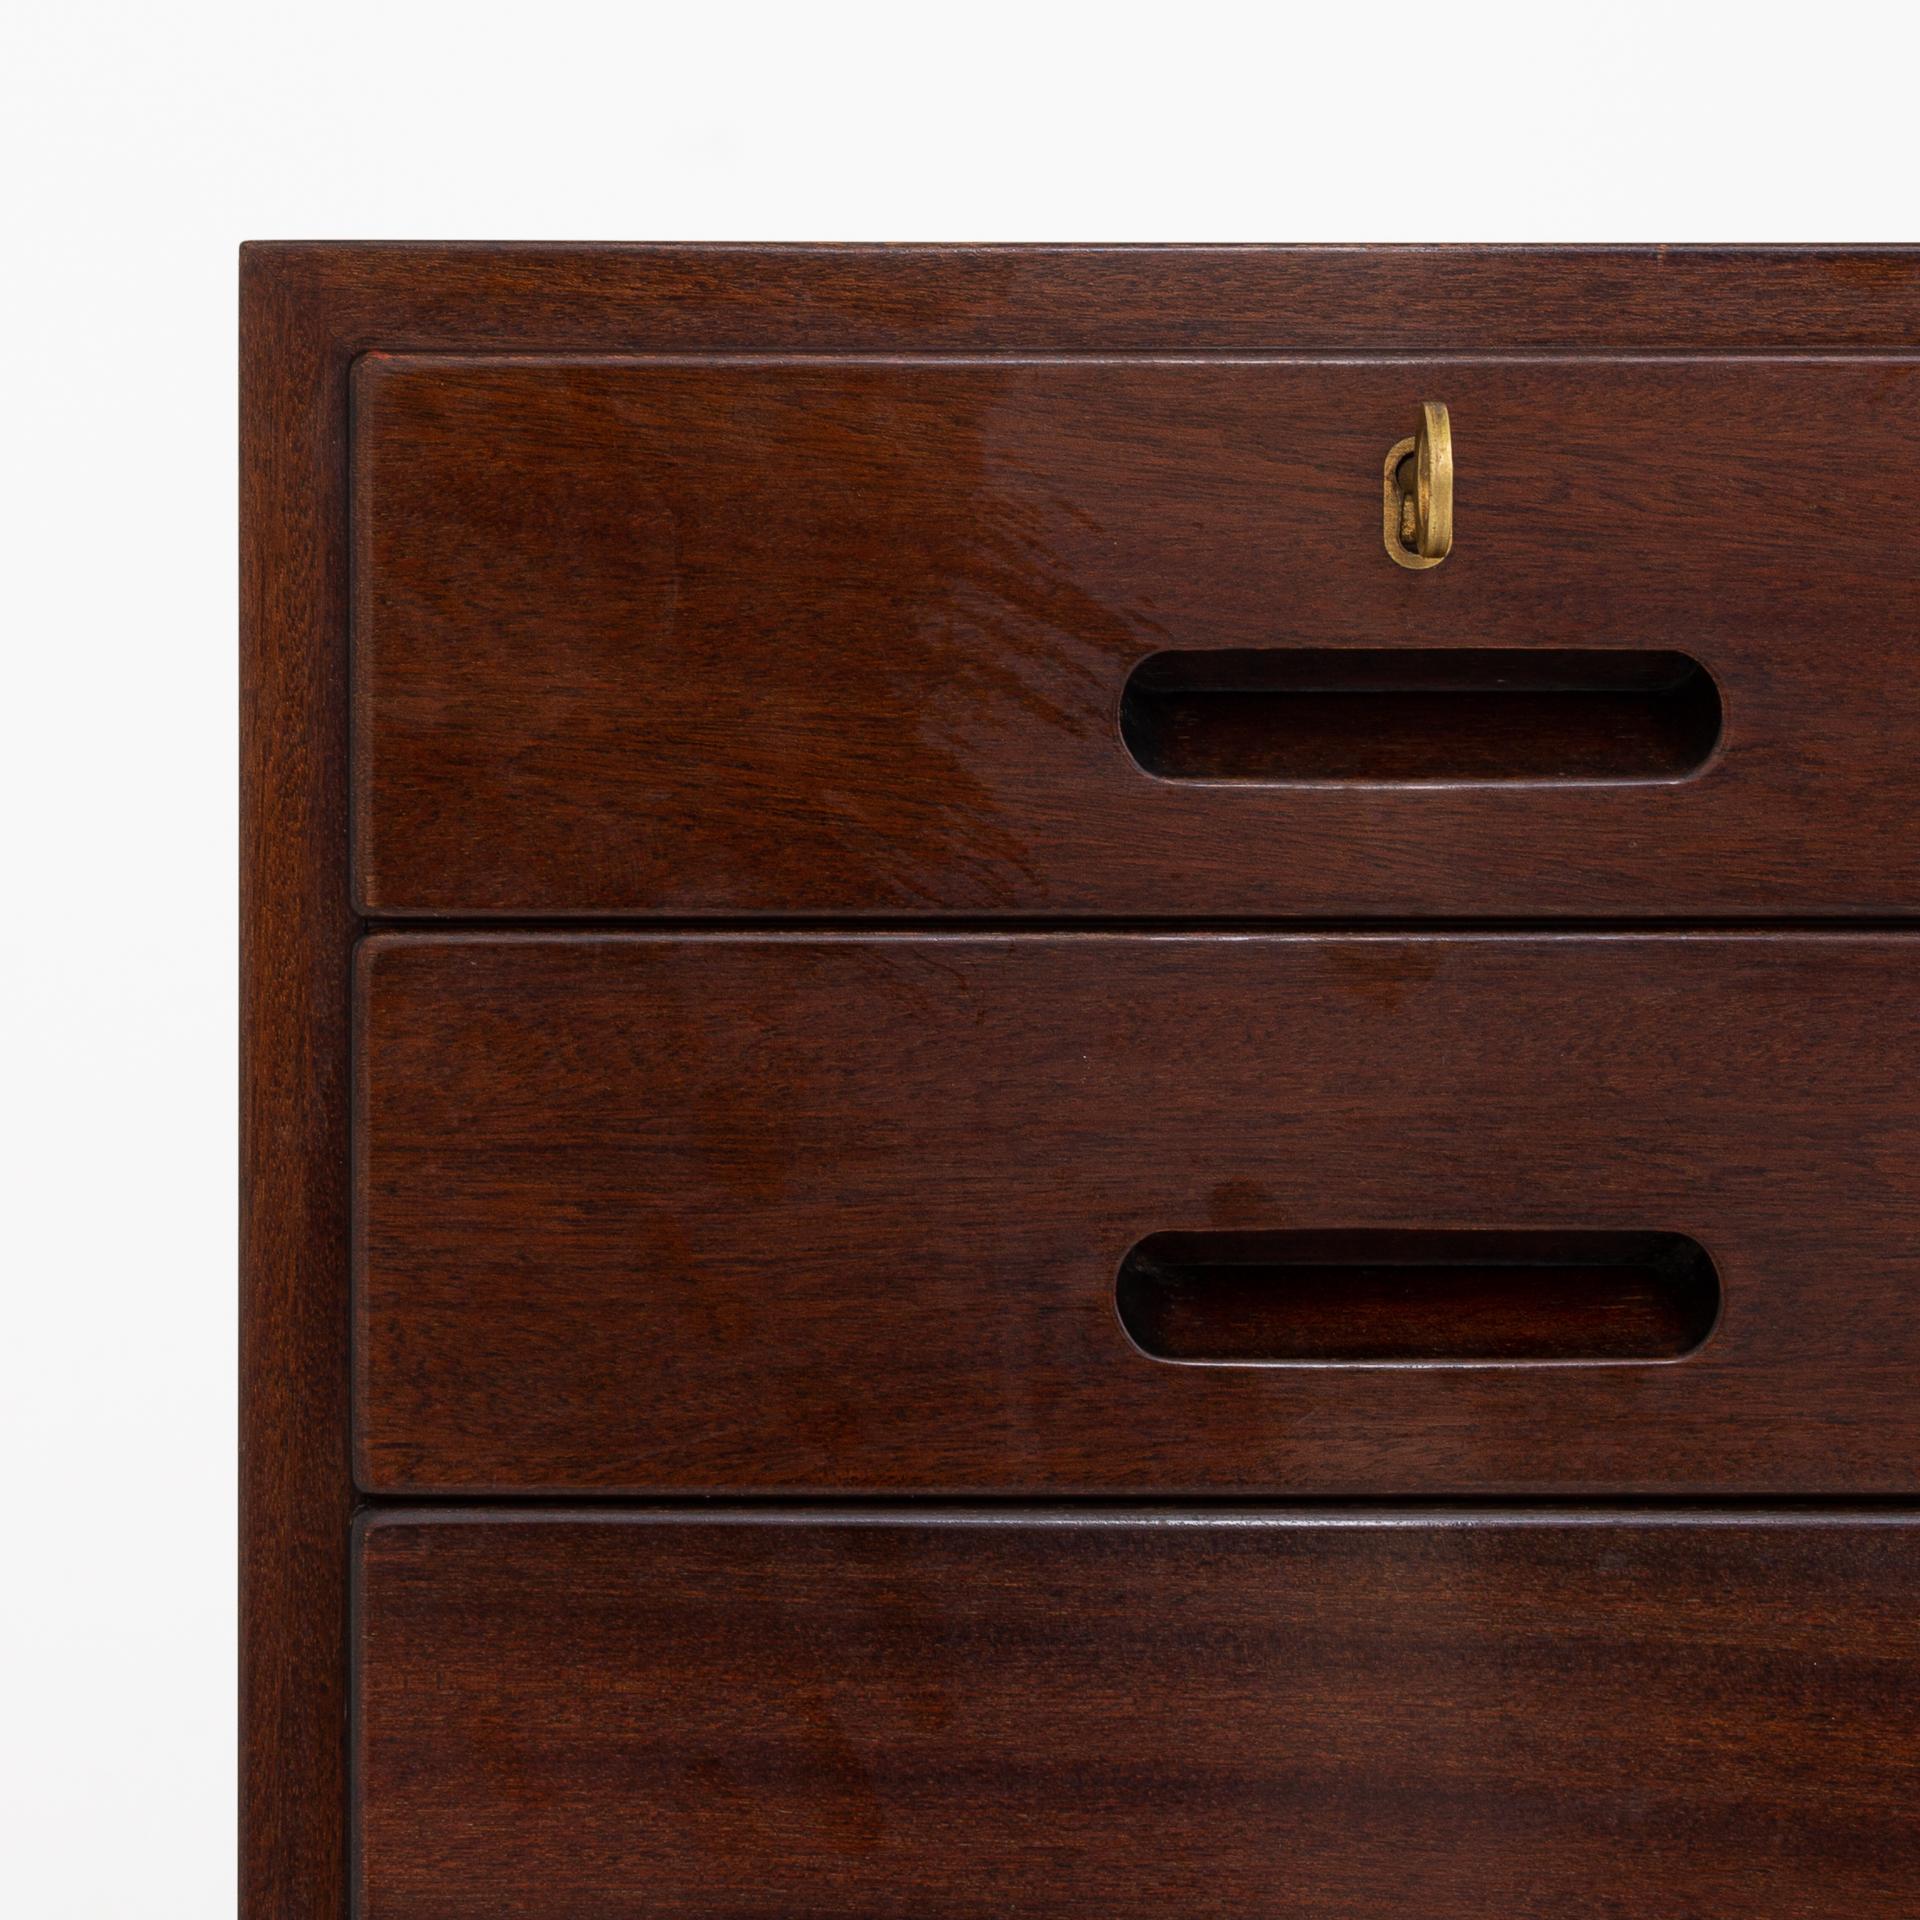 Chest of drawers in mahogany with drawers in different sizes. Maker P. Jeppesen.